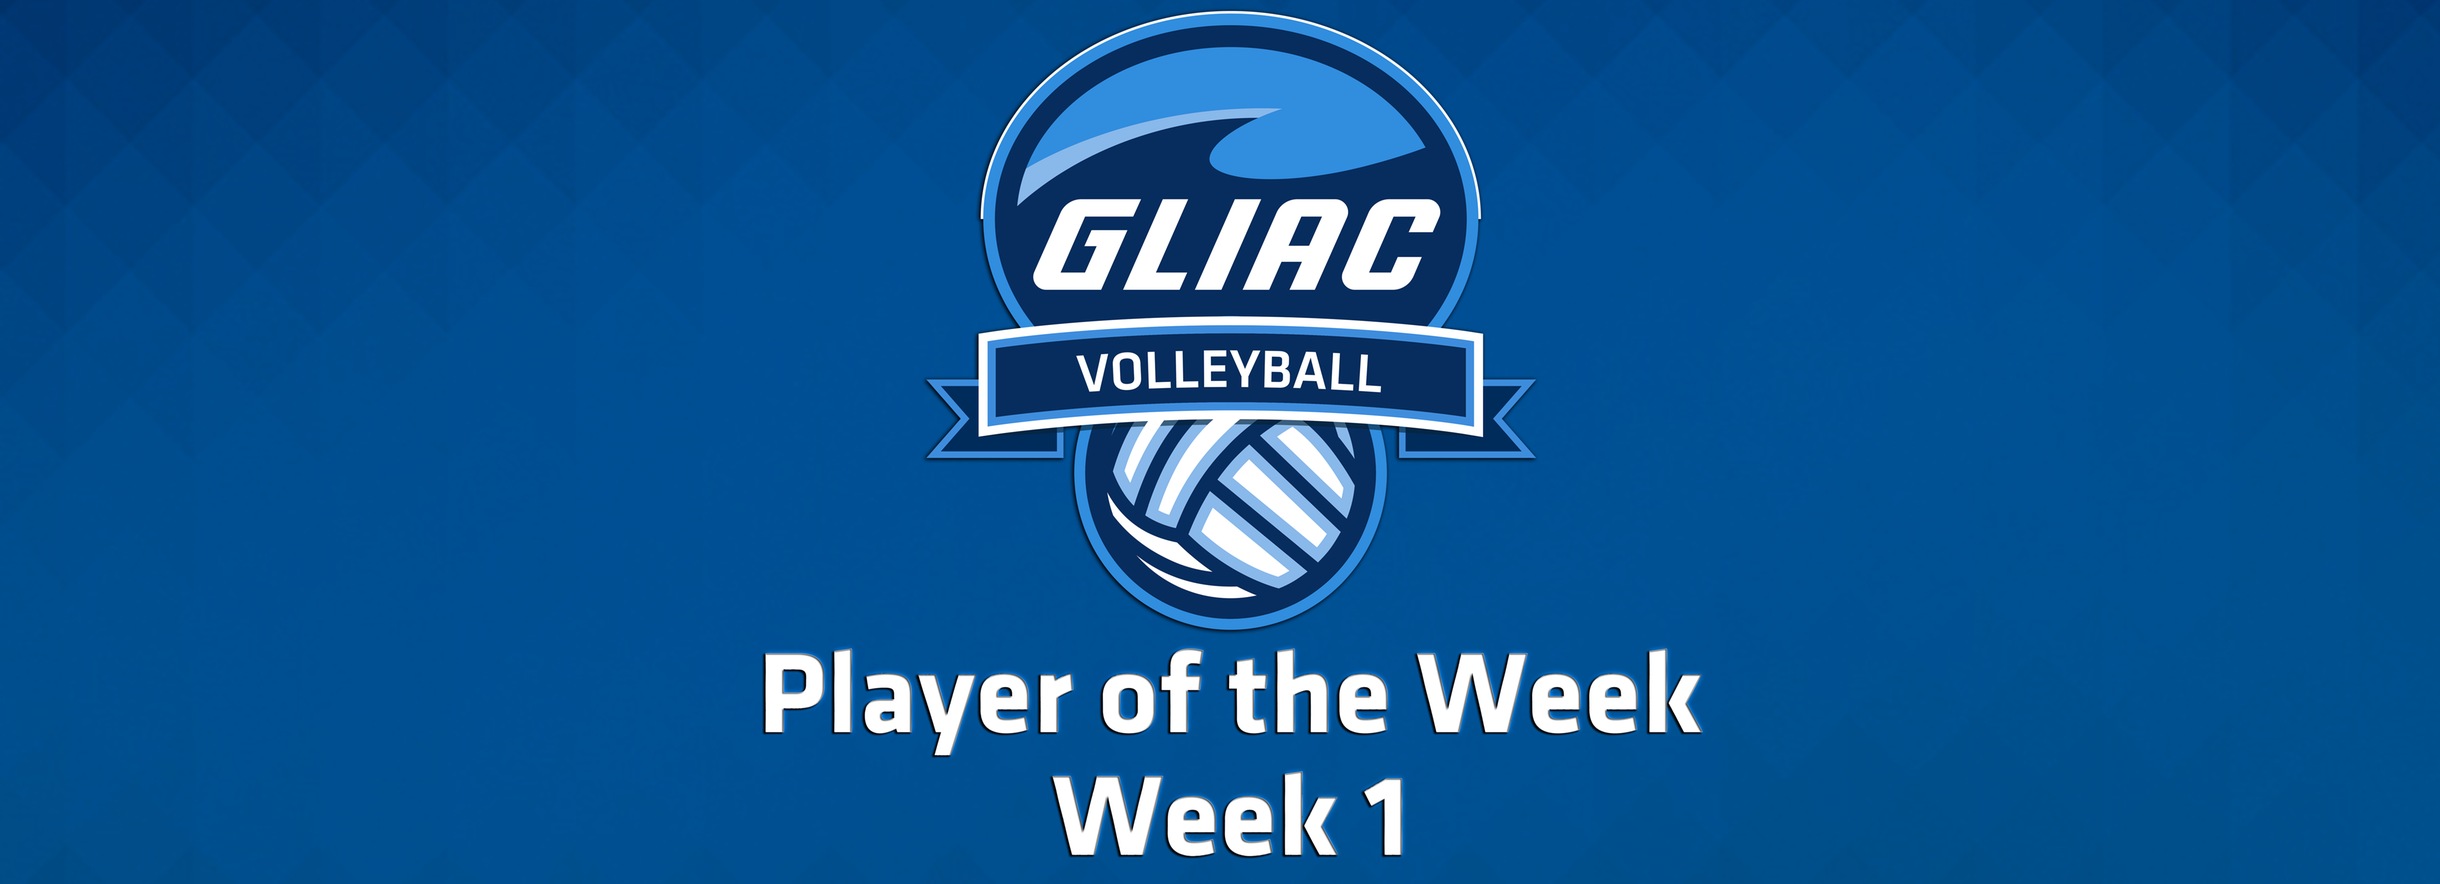 Michigan Tech's Ghormley, Wayne State's Wagner Highlight GLIAC Volleyball Players of the Week